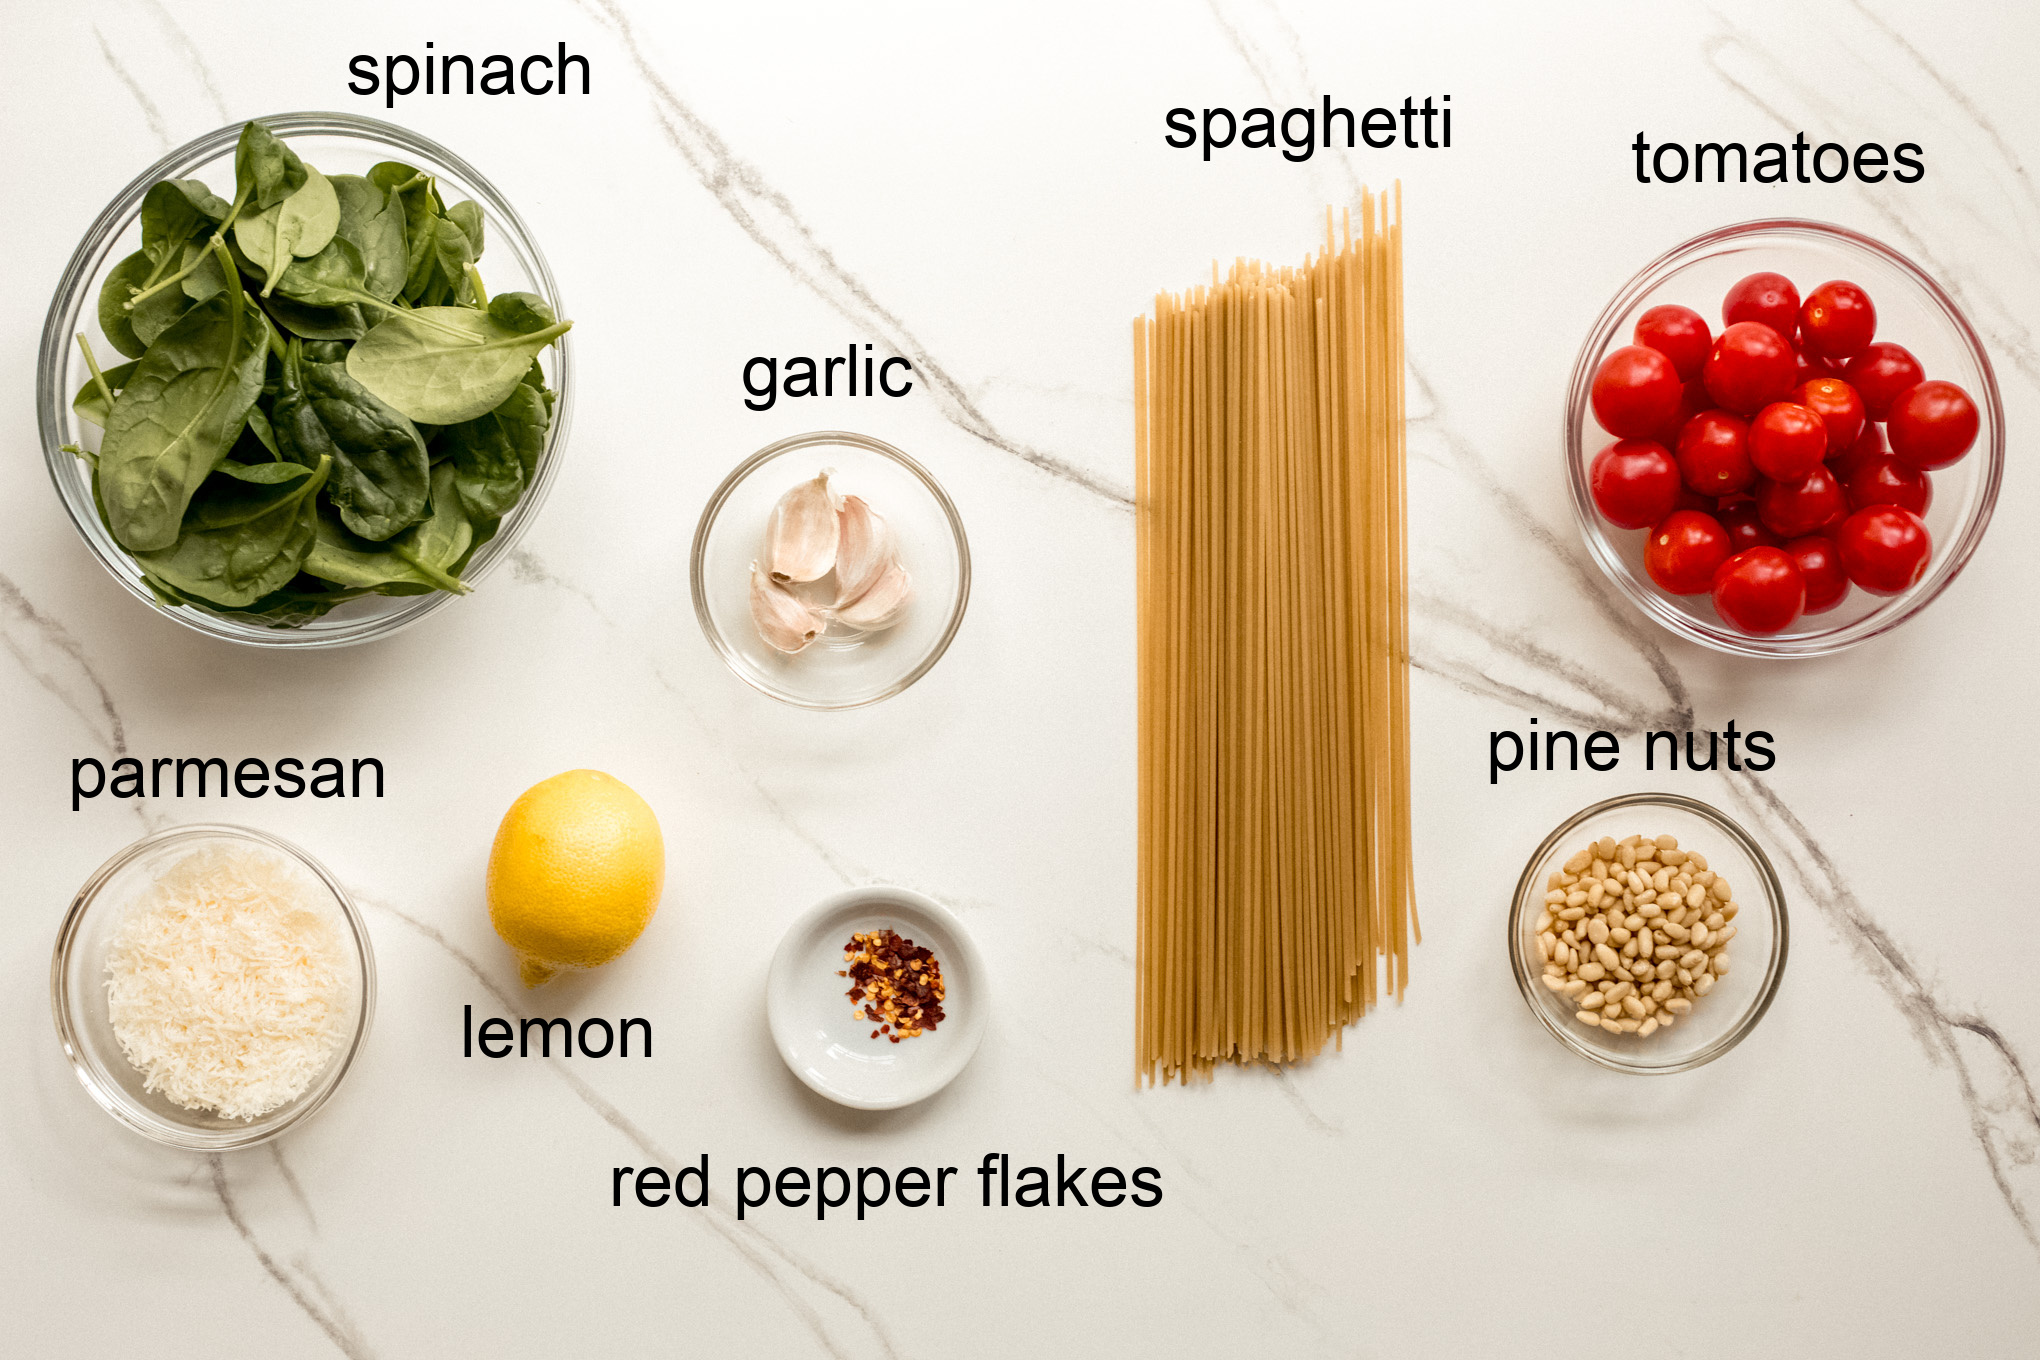 ingredients for pasta with spinach and tomatoes.